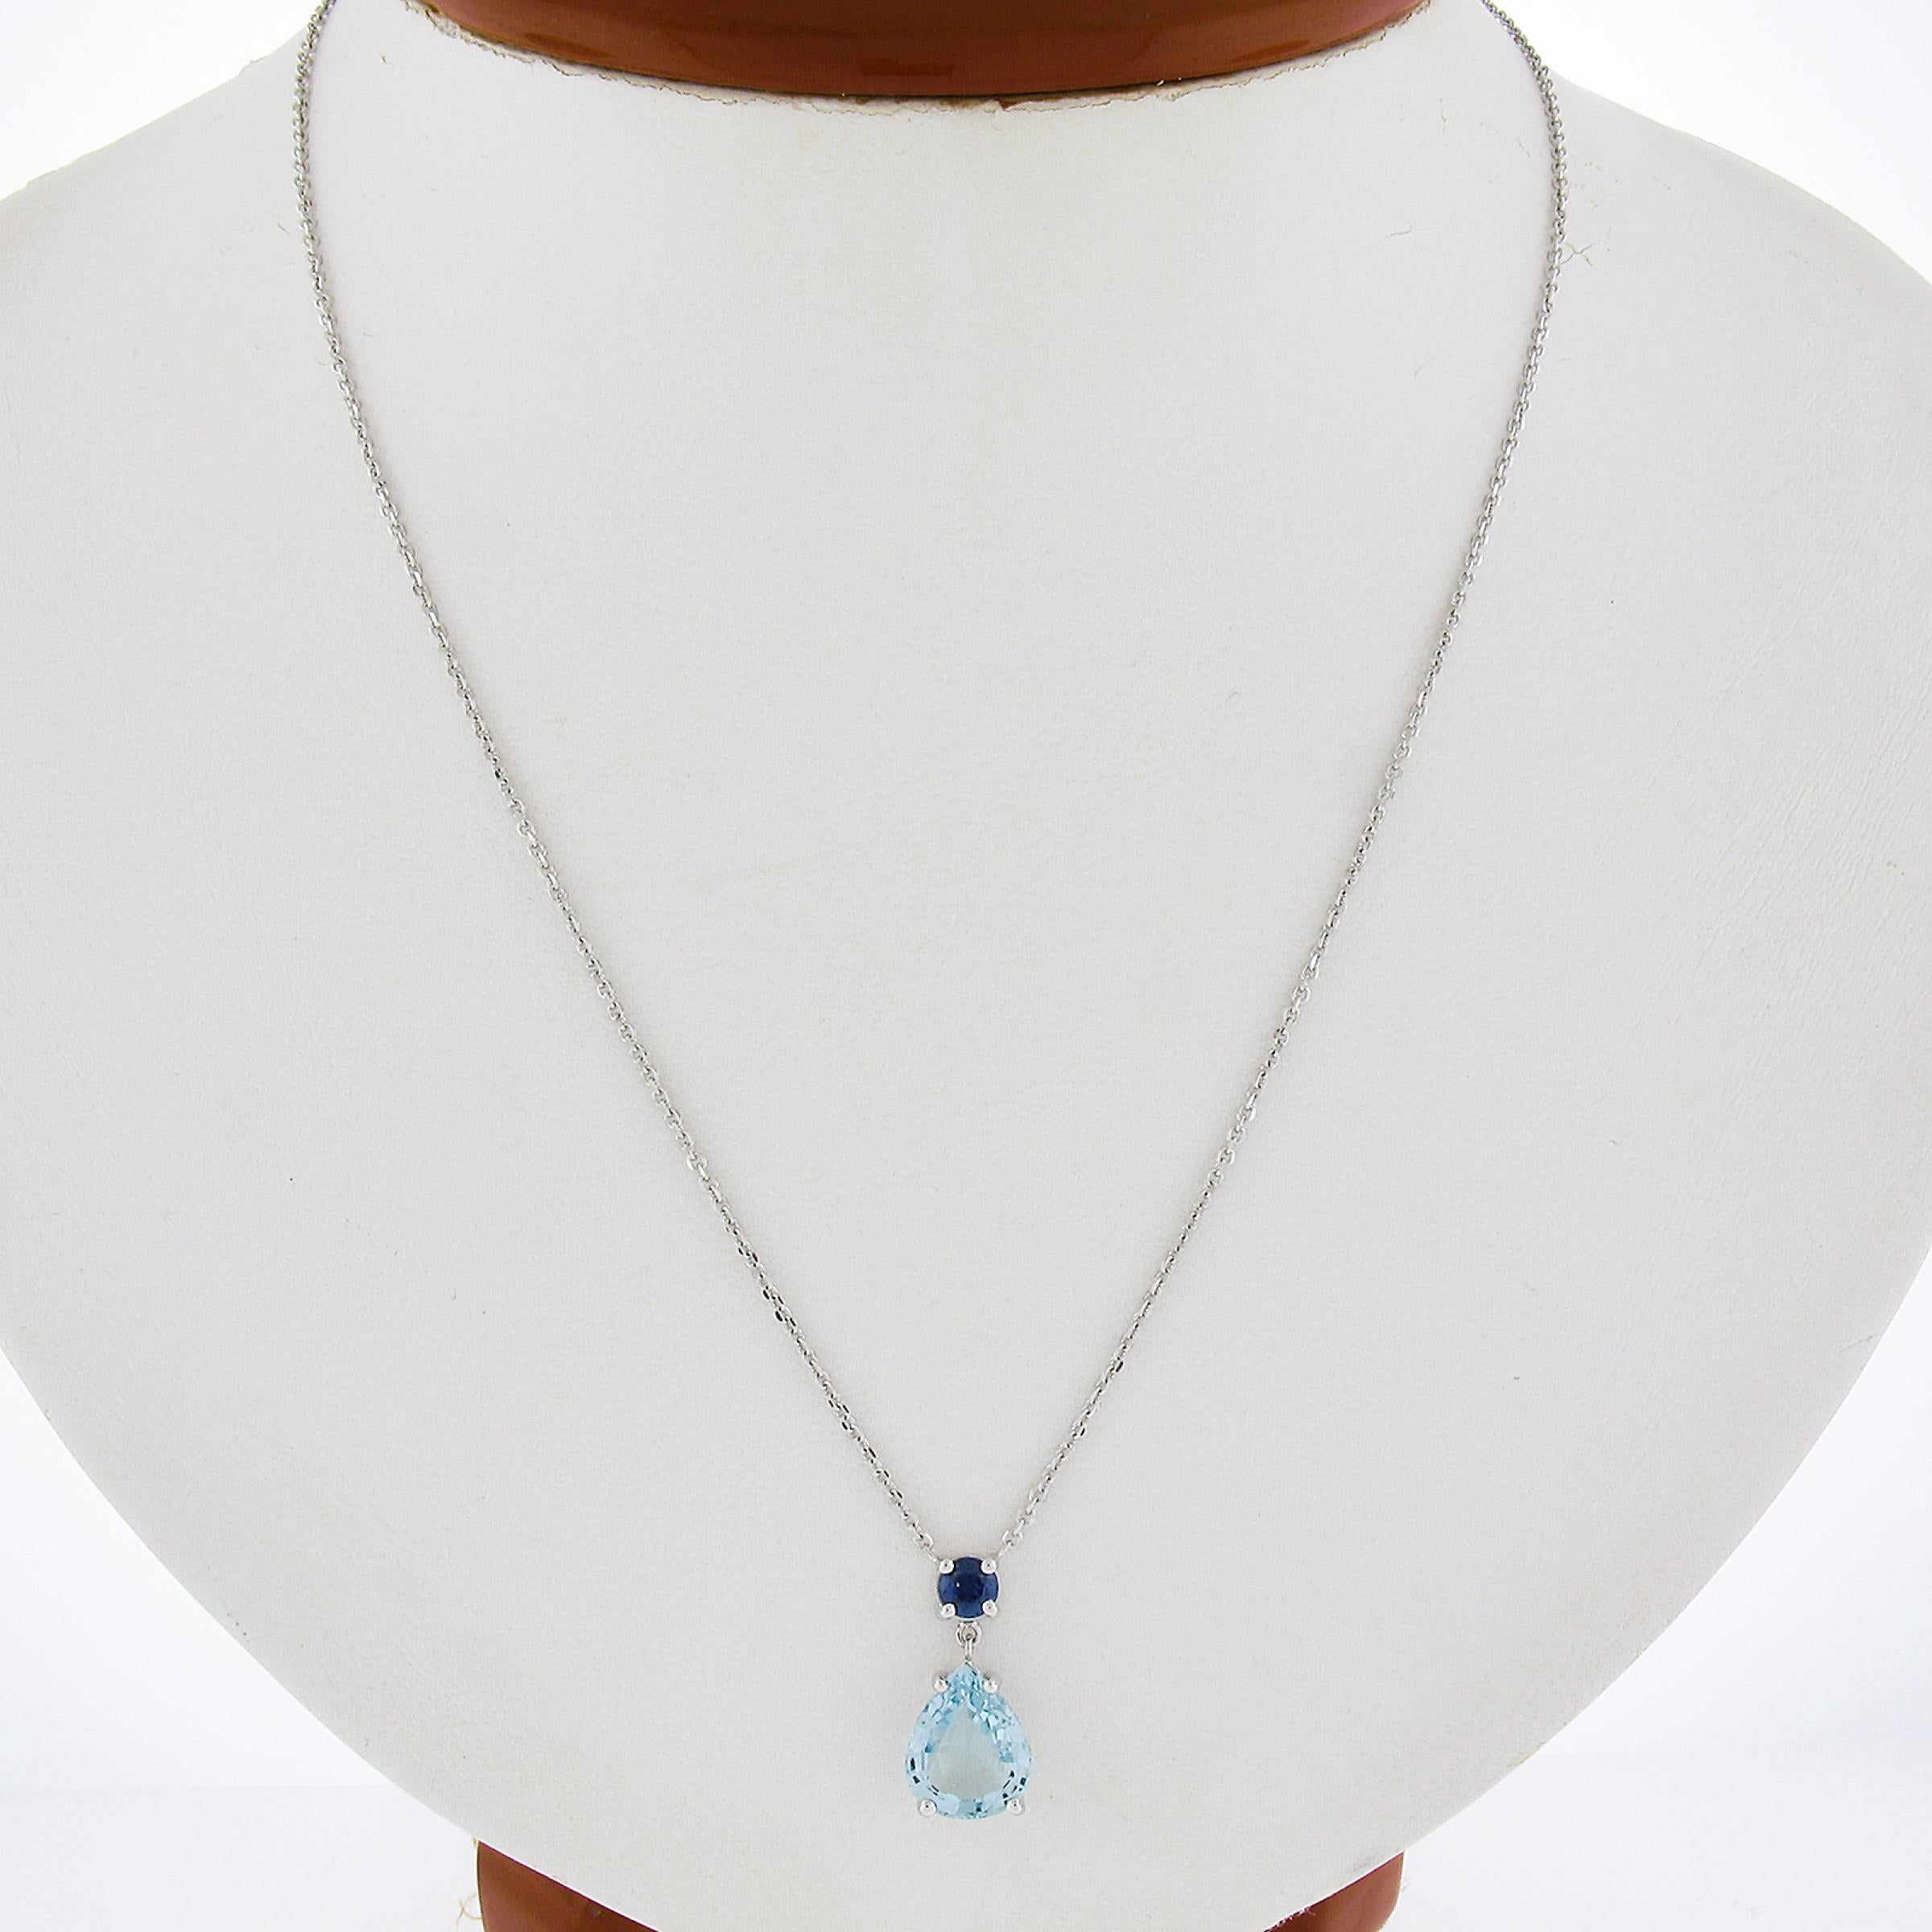 Fantastic Contrast of Blues! Very wearable necklace with a simple elegant design. The Aquamarine stands out and the sapphire adds a touch that makes this piece standout! Enjoy!

--Stone(s):--
(1) Natural Genuine Aquamarine - Pear Cut - Prong Set -